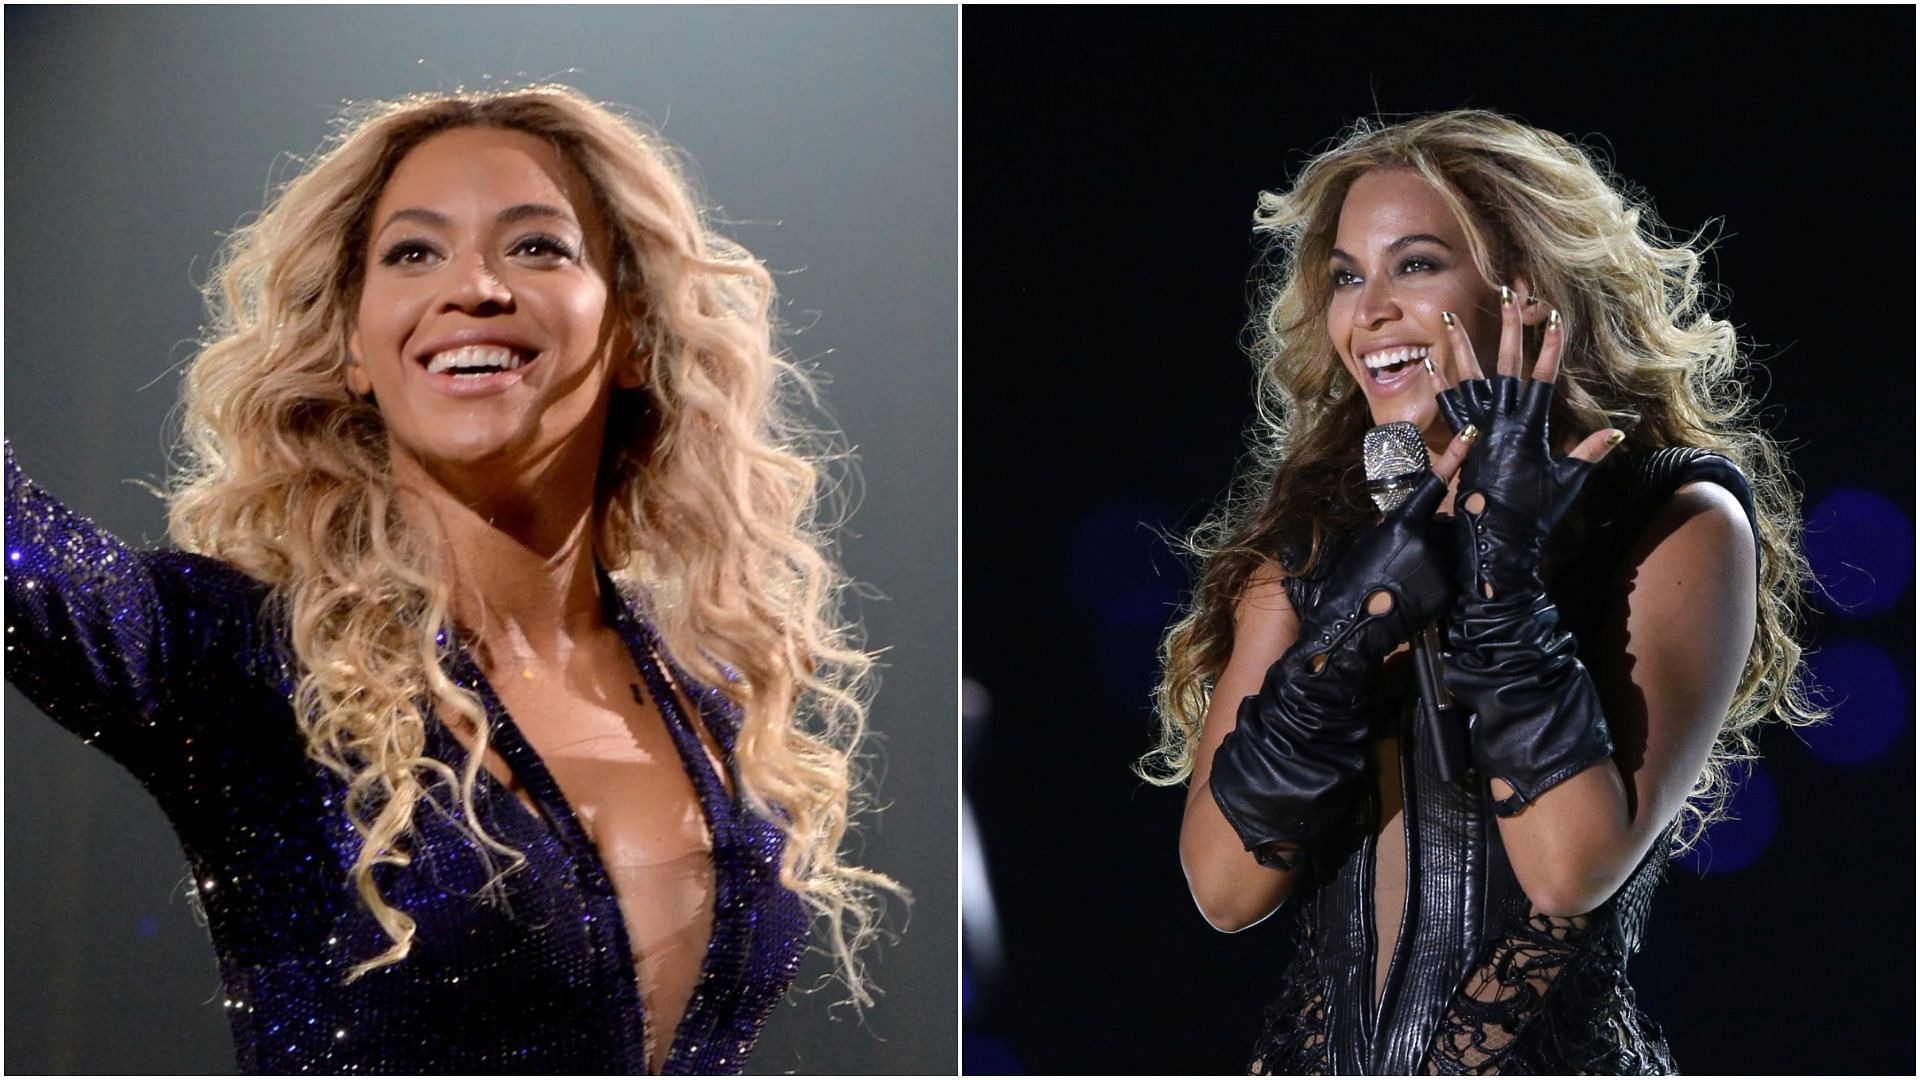 Beyonce&#039;s upcoming album has reportedly been leaked. (Images via Getty)